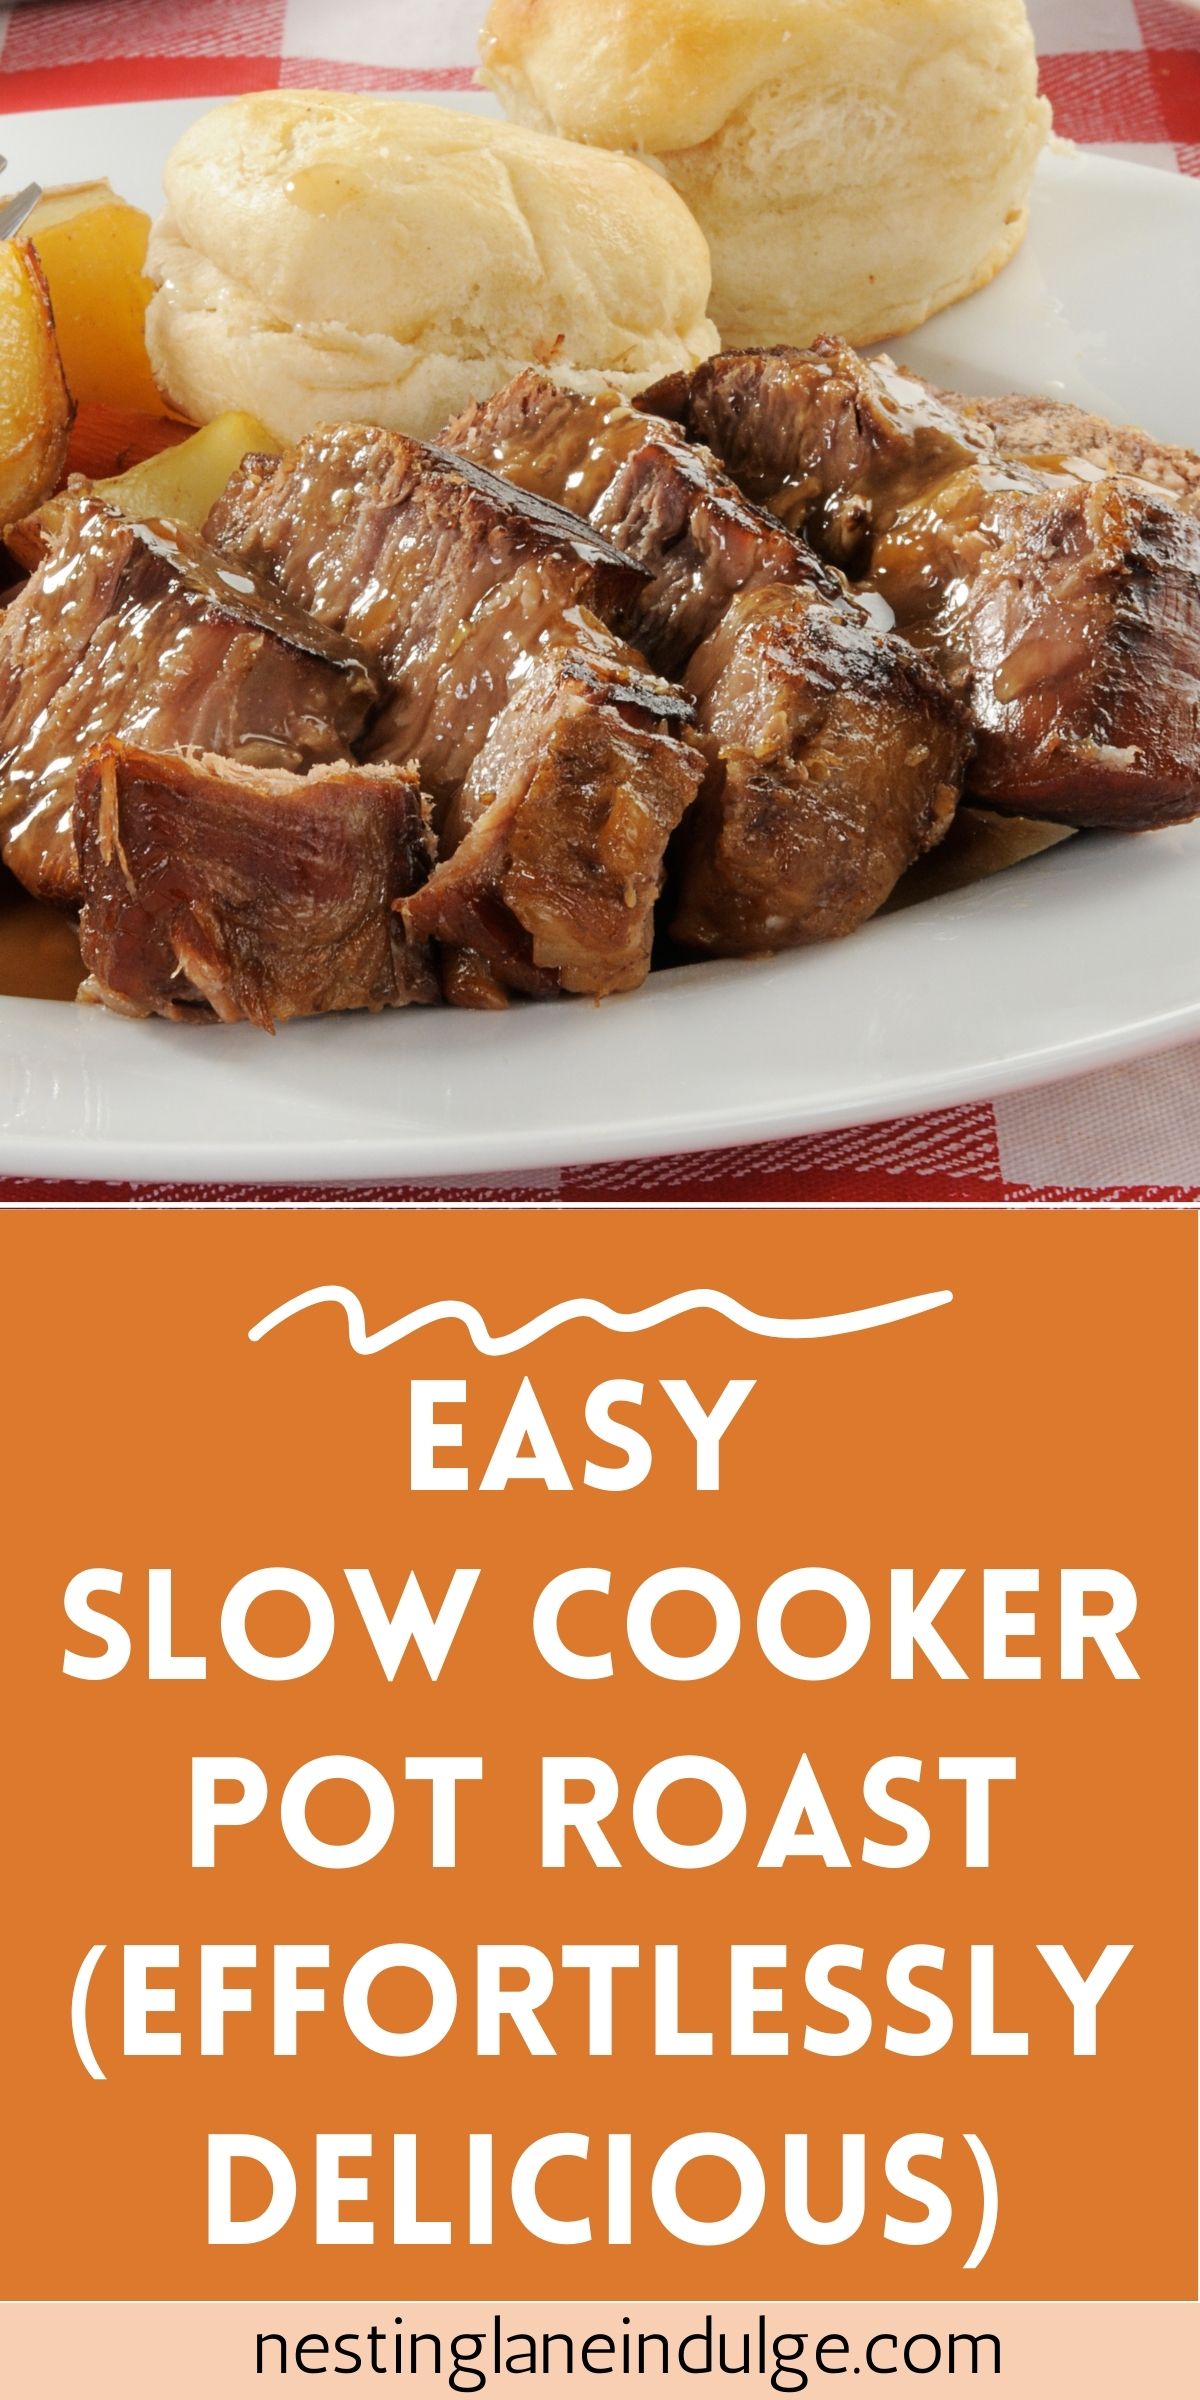 Graphic for Pinterest of Easy Slow Cooker Pot Roast (Effortlessly Delicious) Recipe.